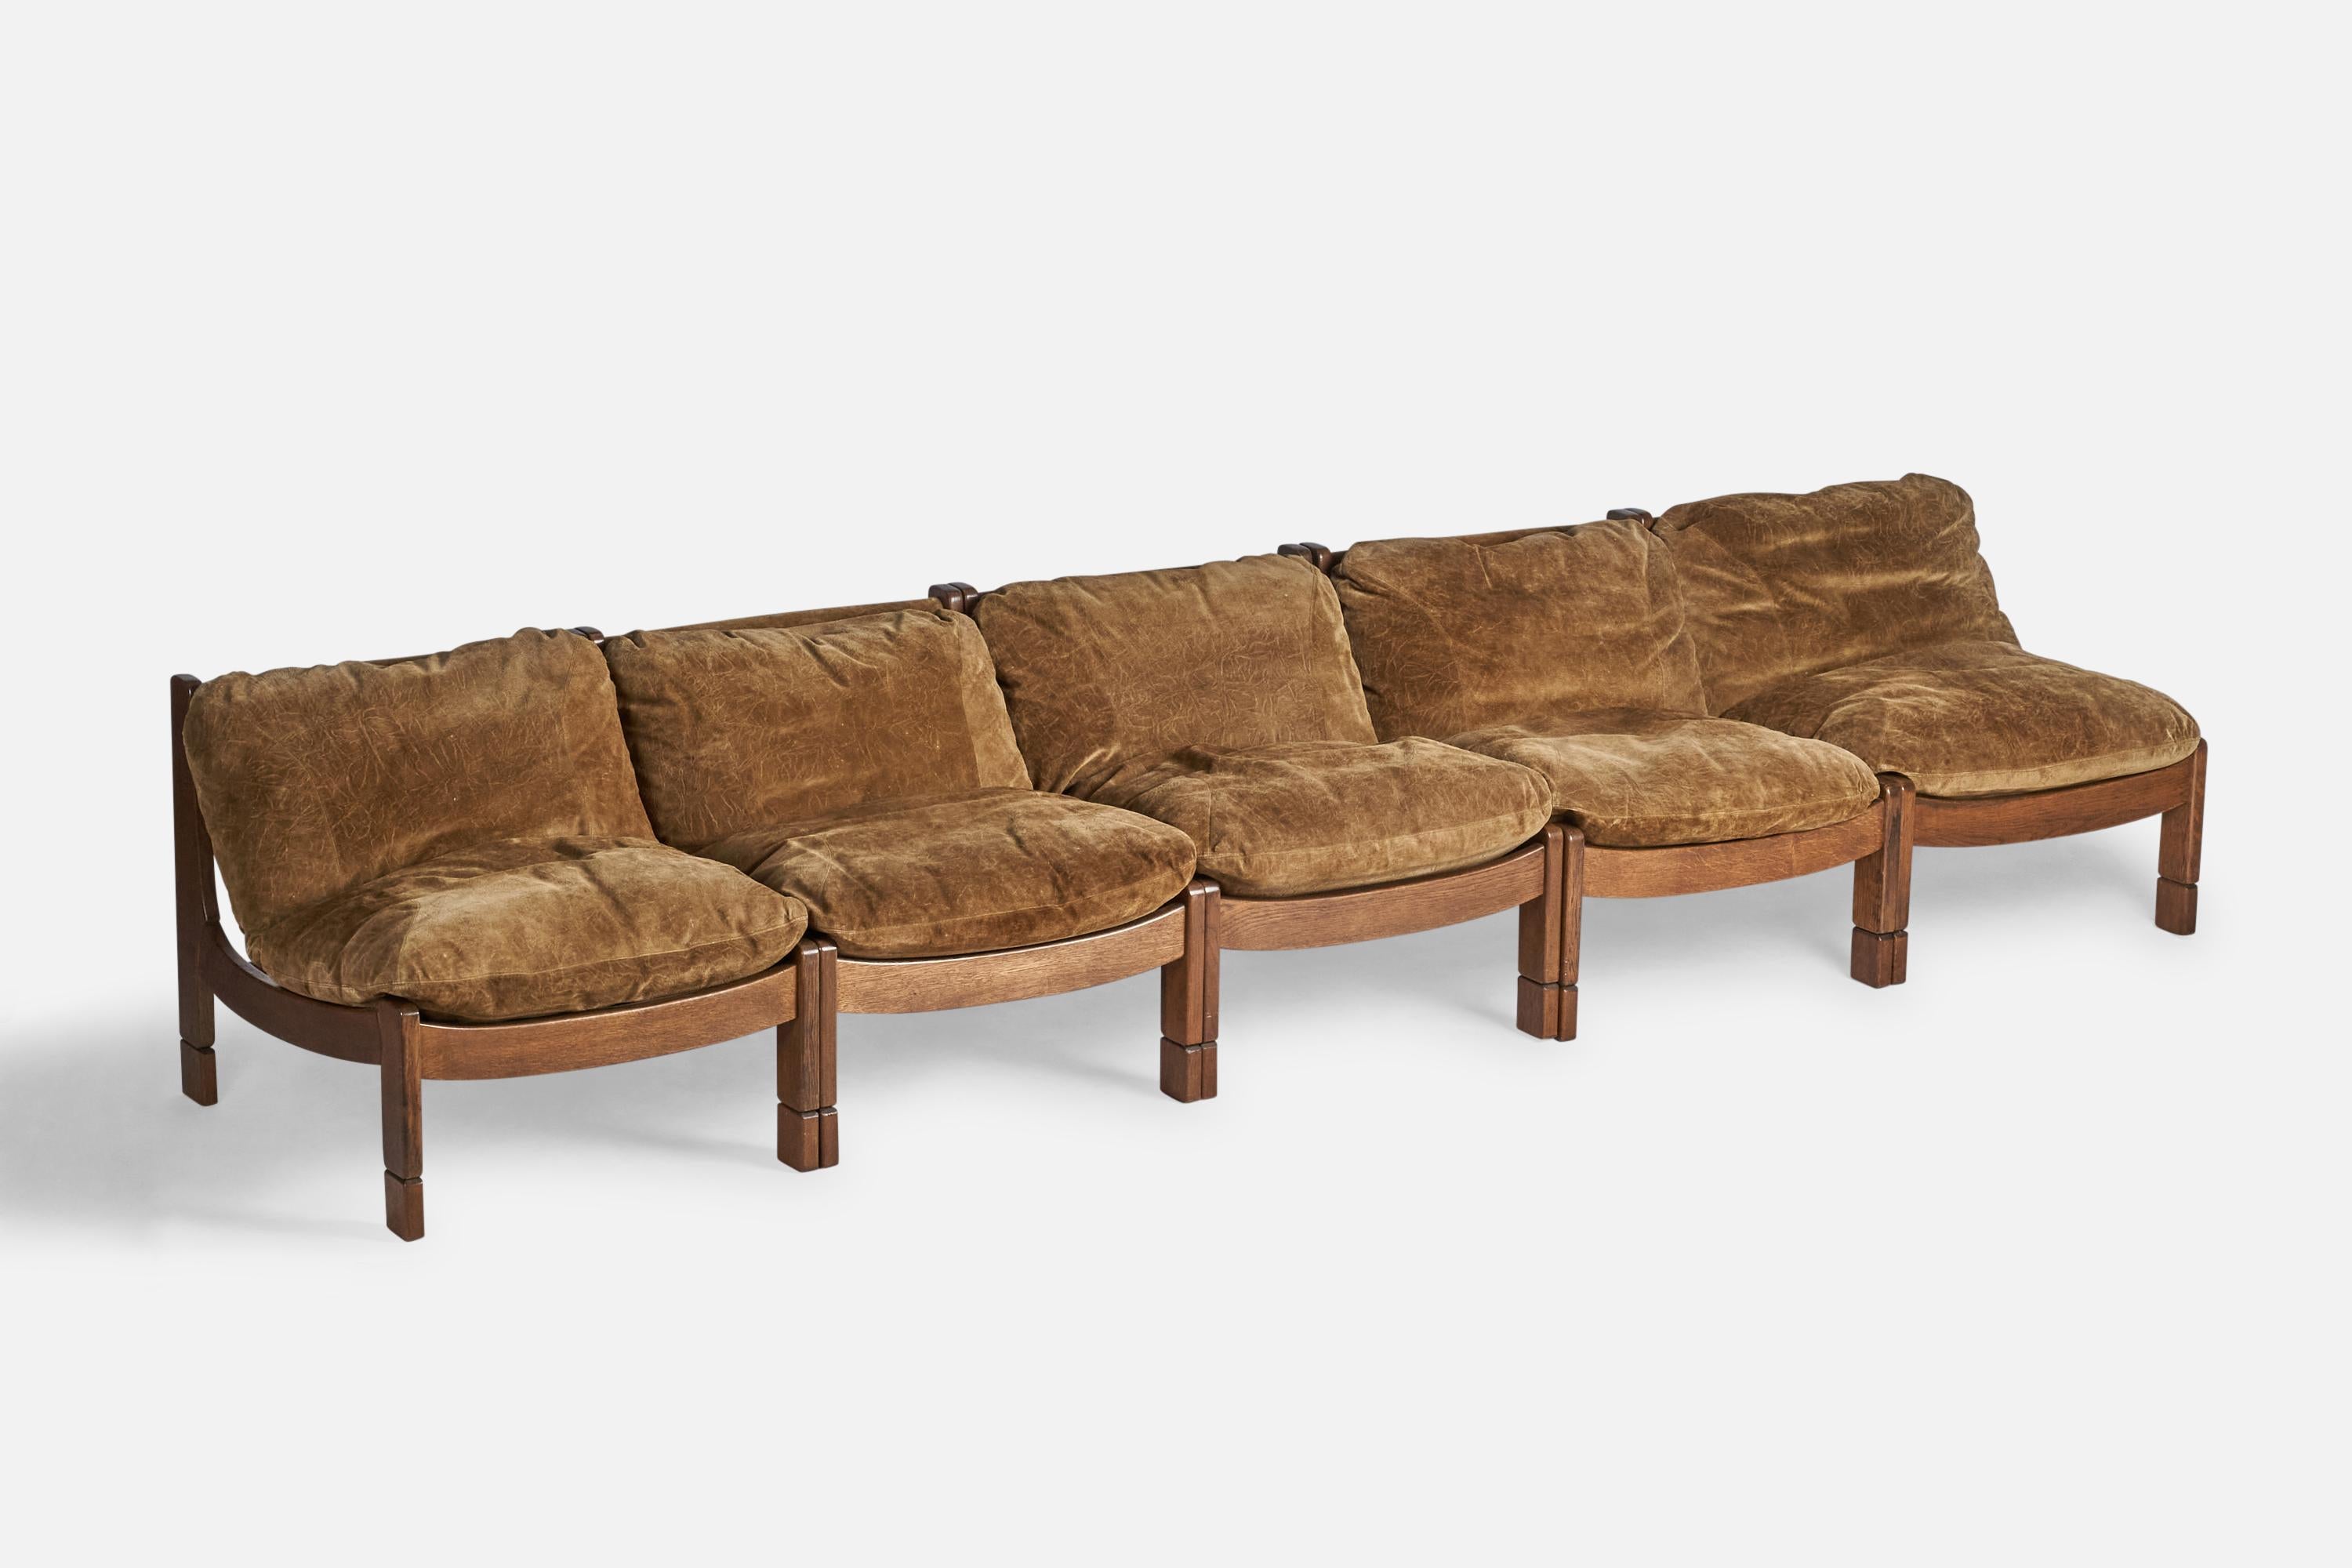 A dark-stained oak, brown suede and cord modular sofa or 5 slipper chairs with ottoman, designed and produced in Spain, c. 1950s.